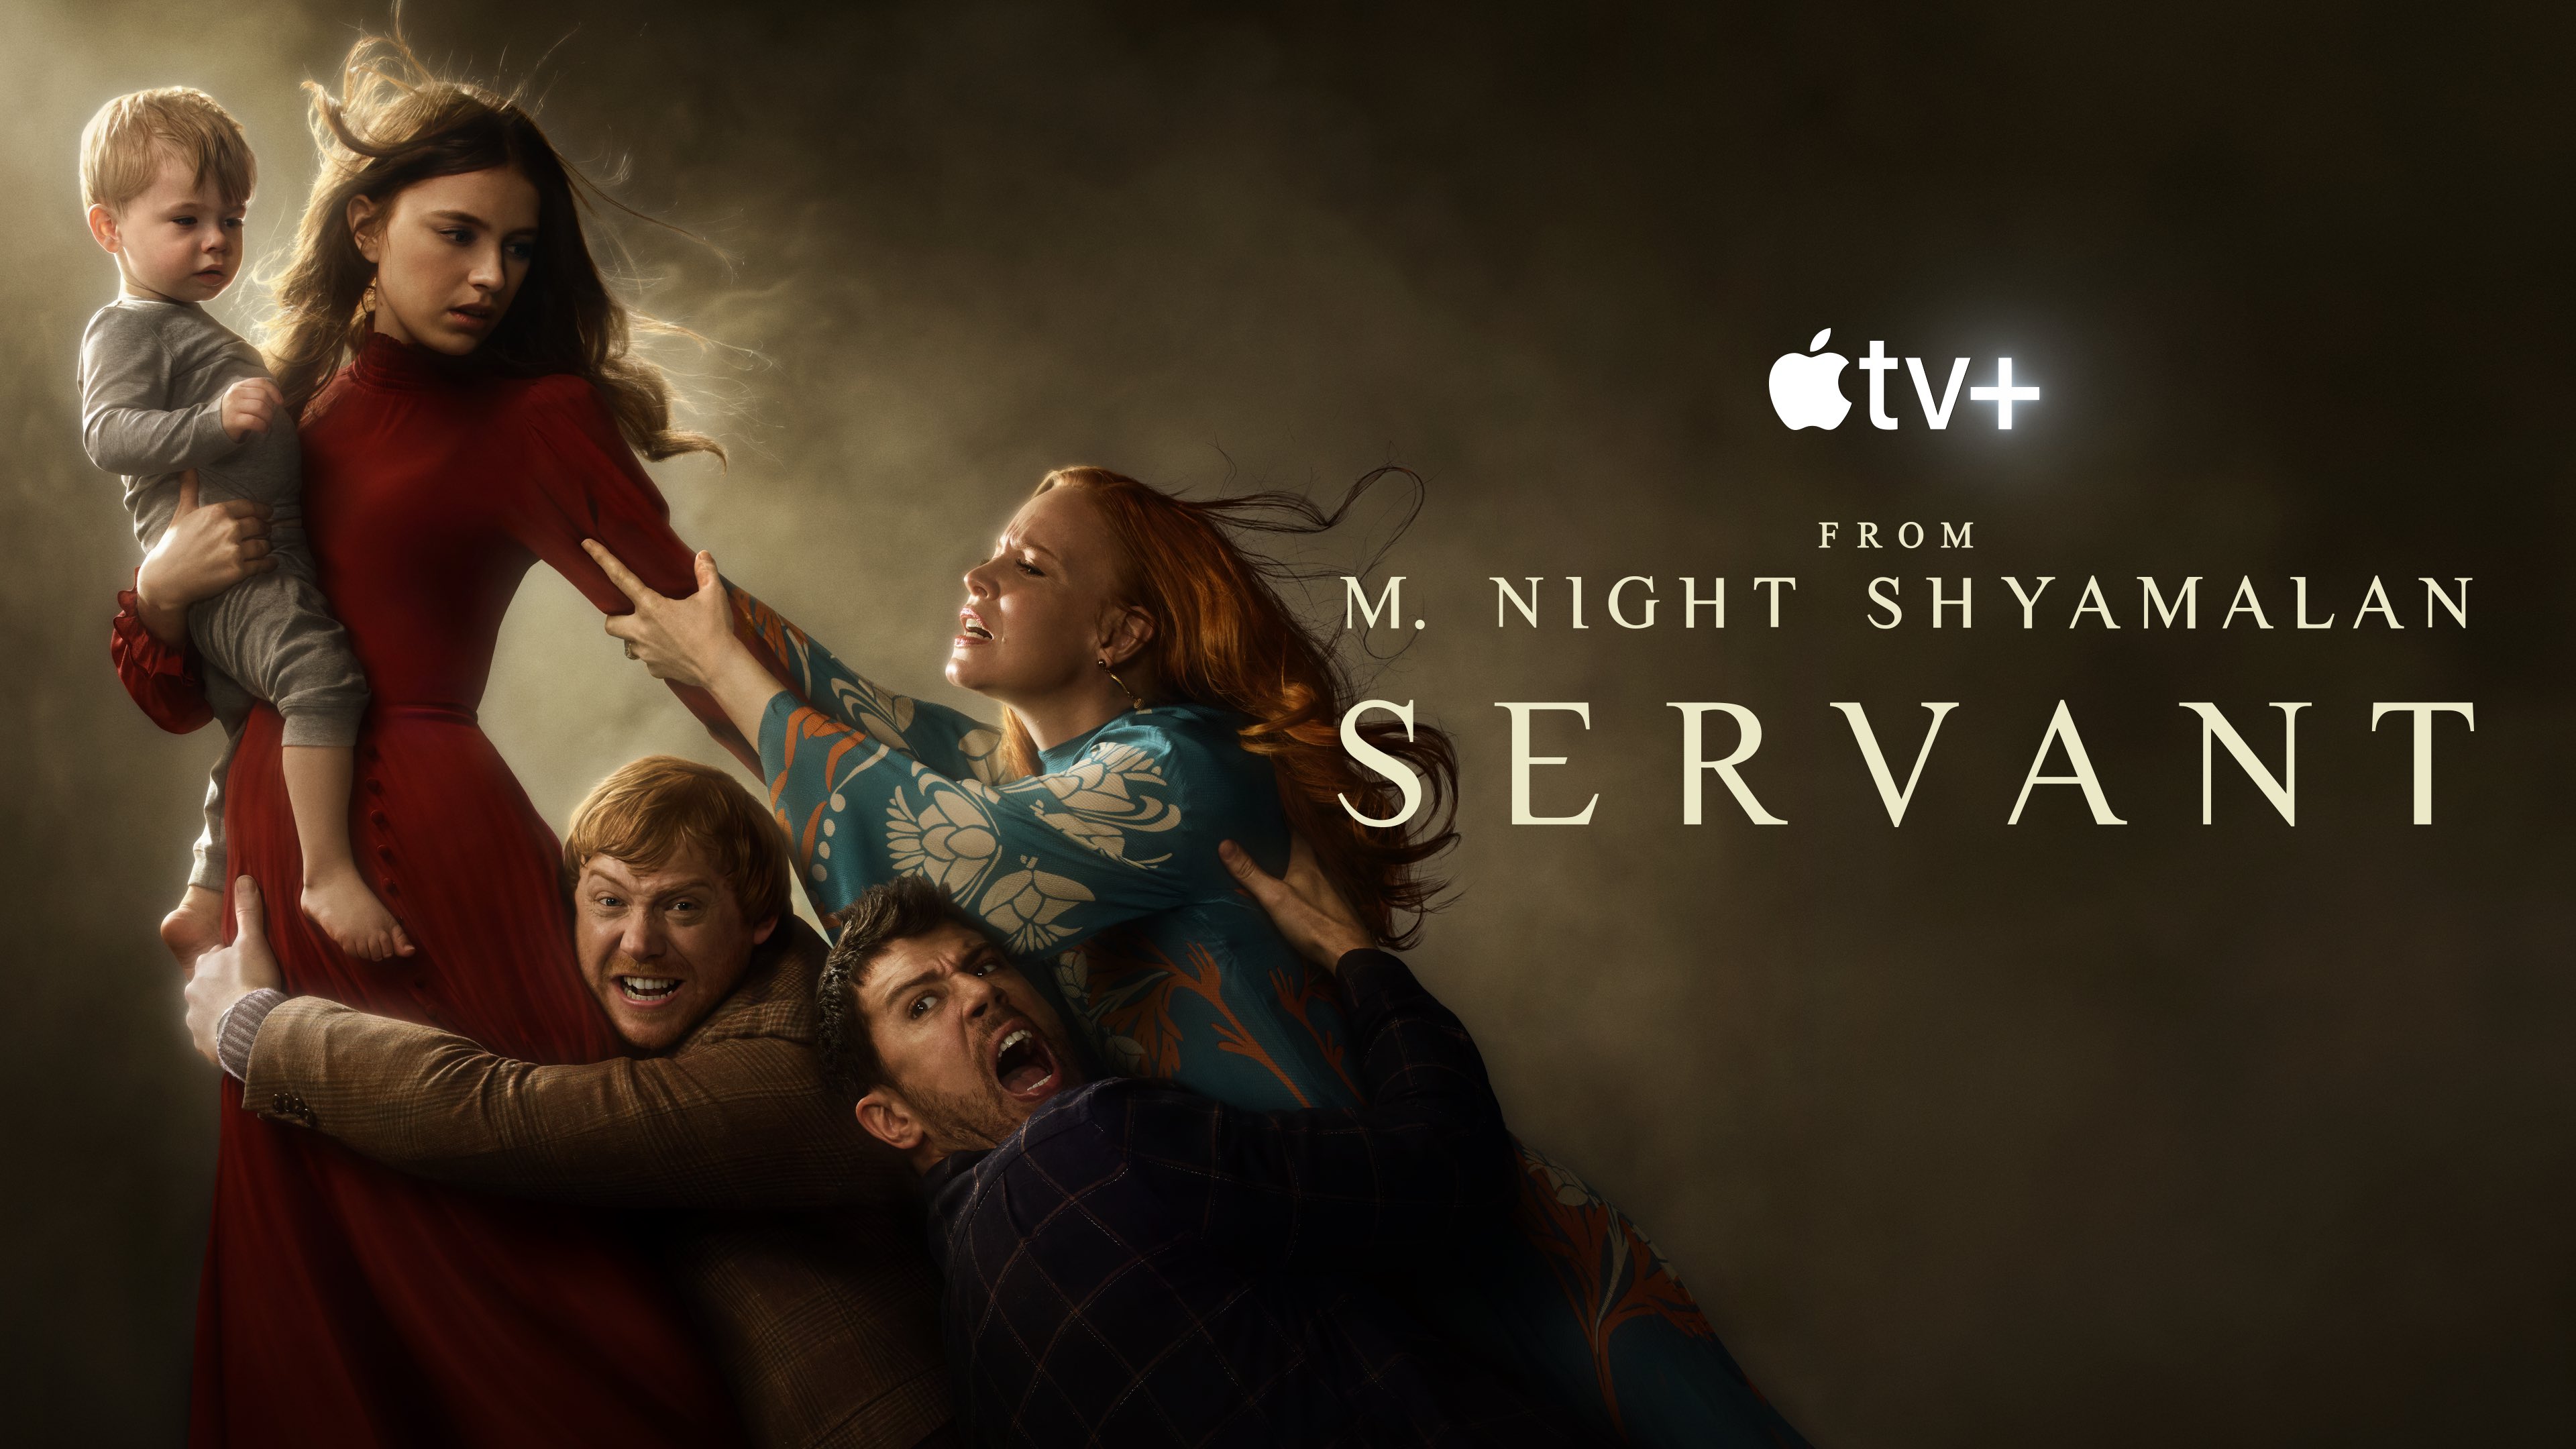 Servant Cast - Every Actor and Character in the Apple TV+ Series